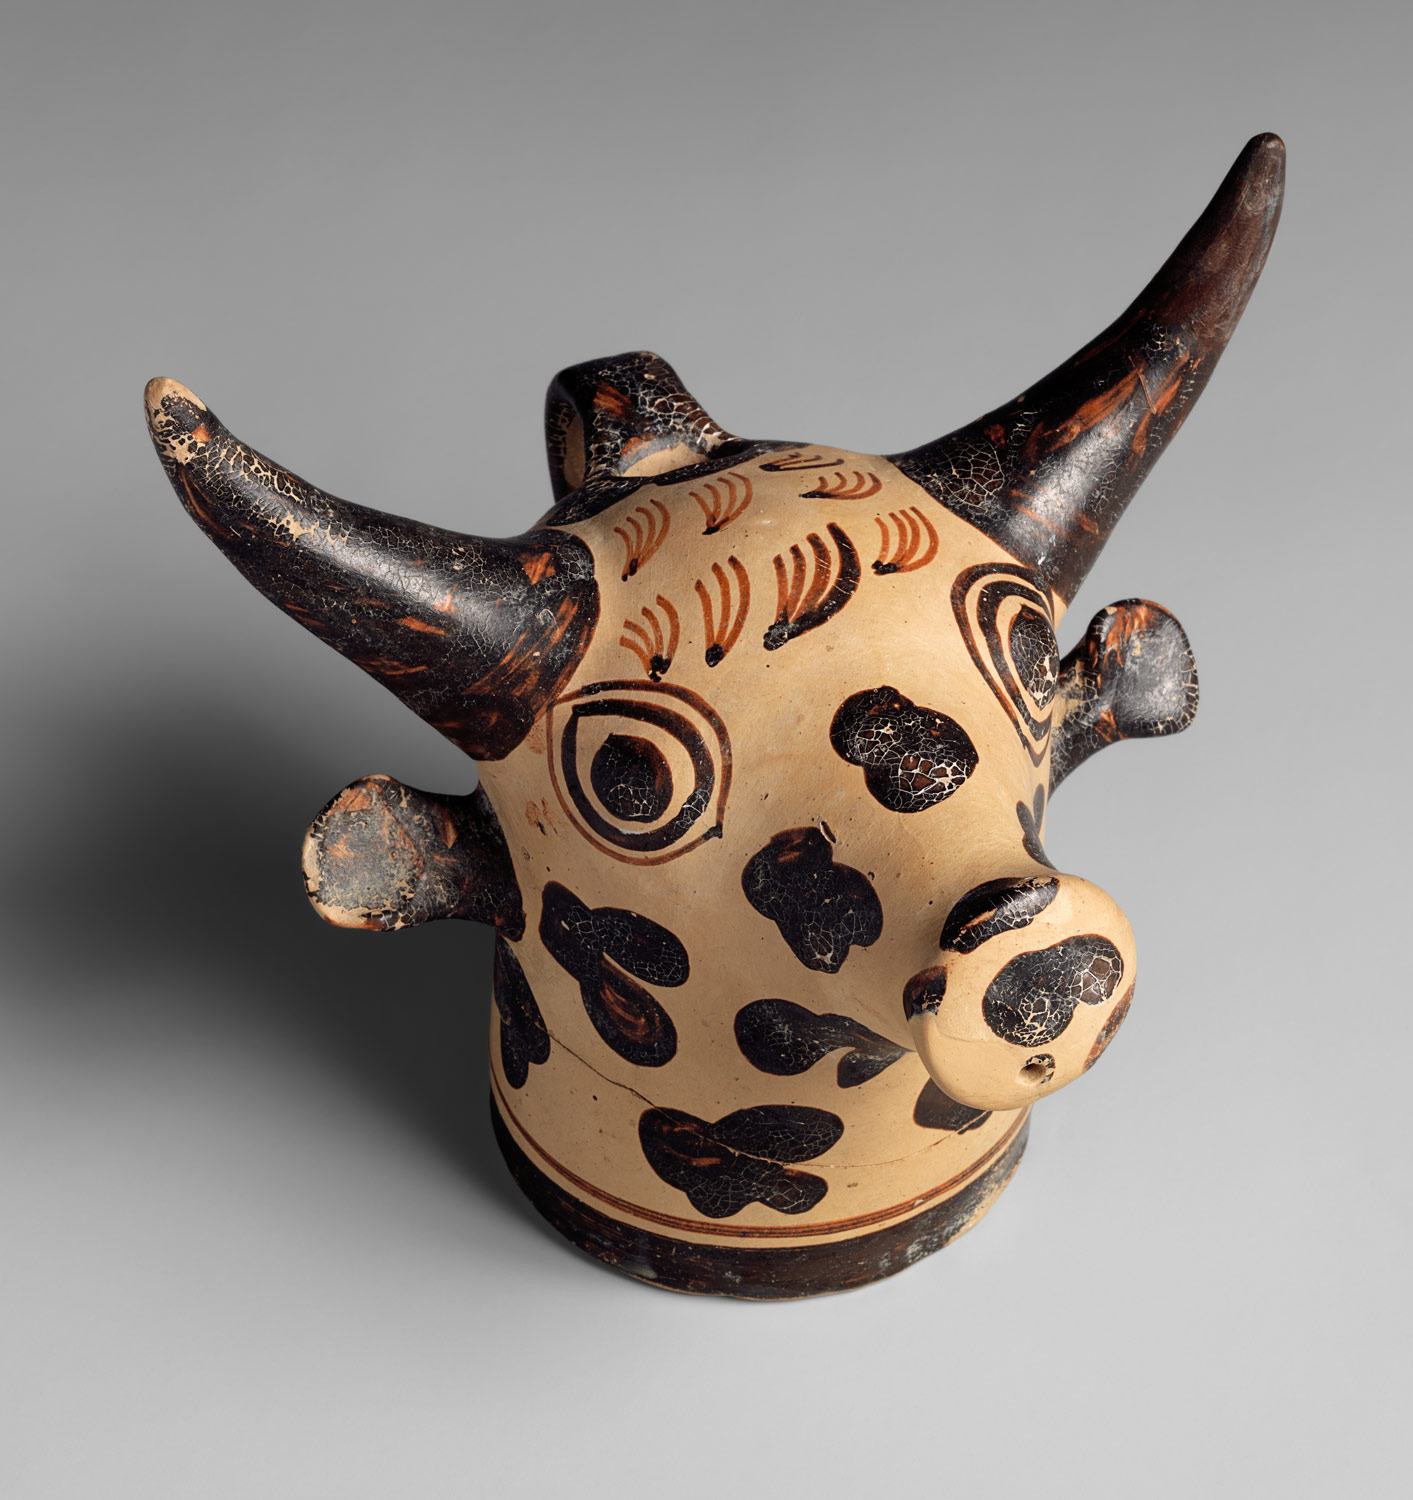 Terracotta vase in the form of a bulls head